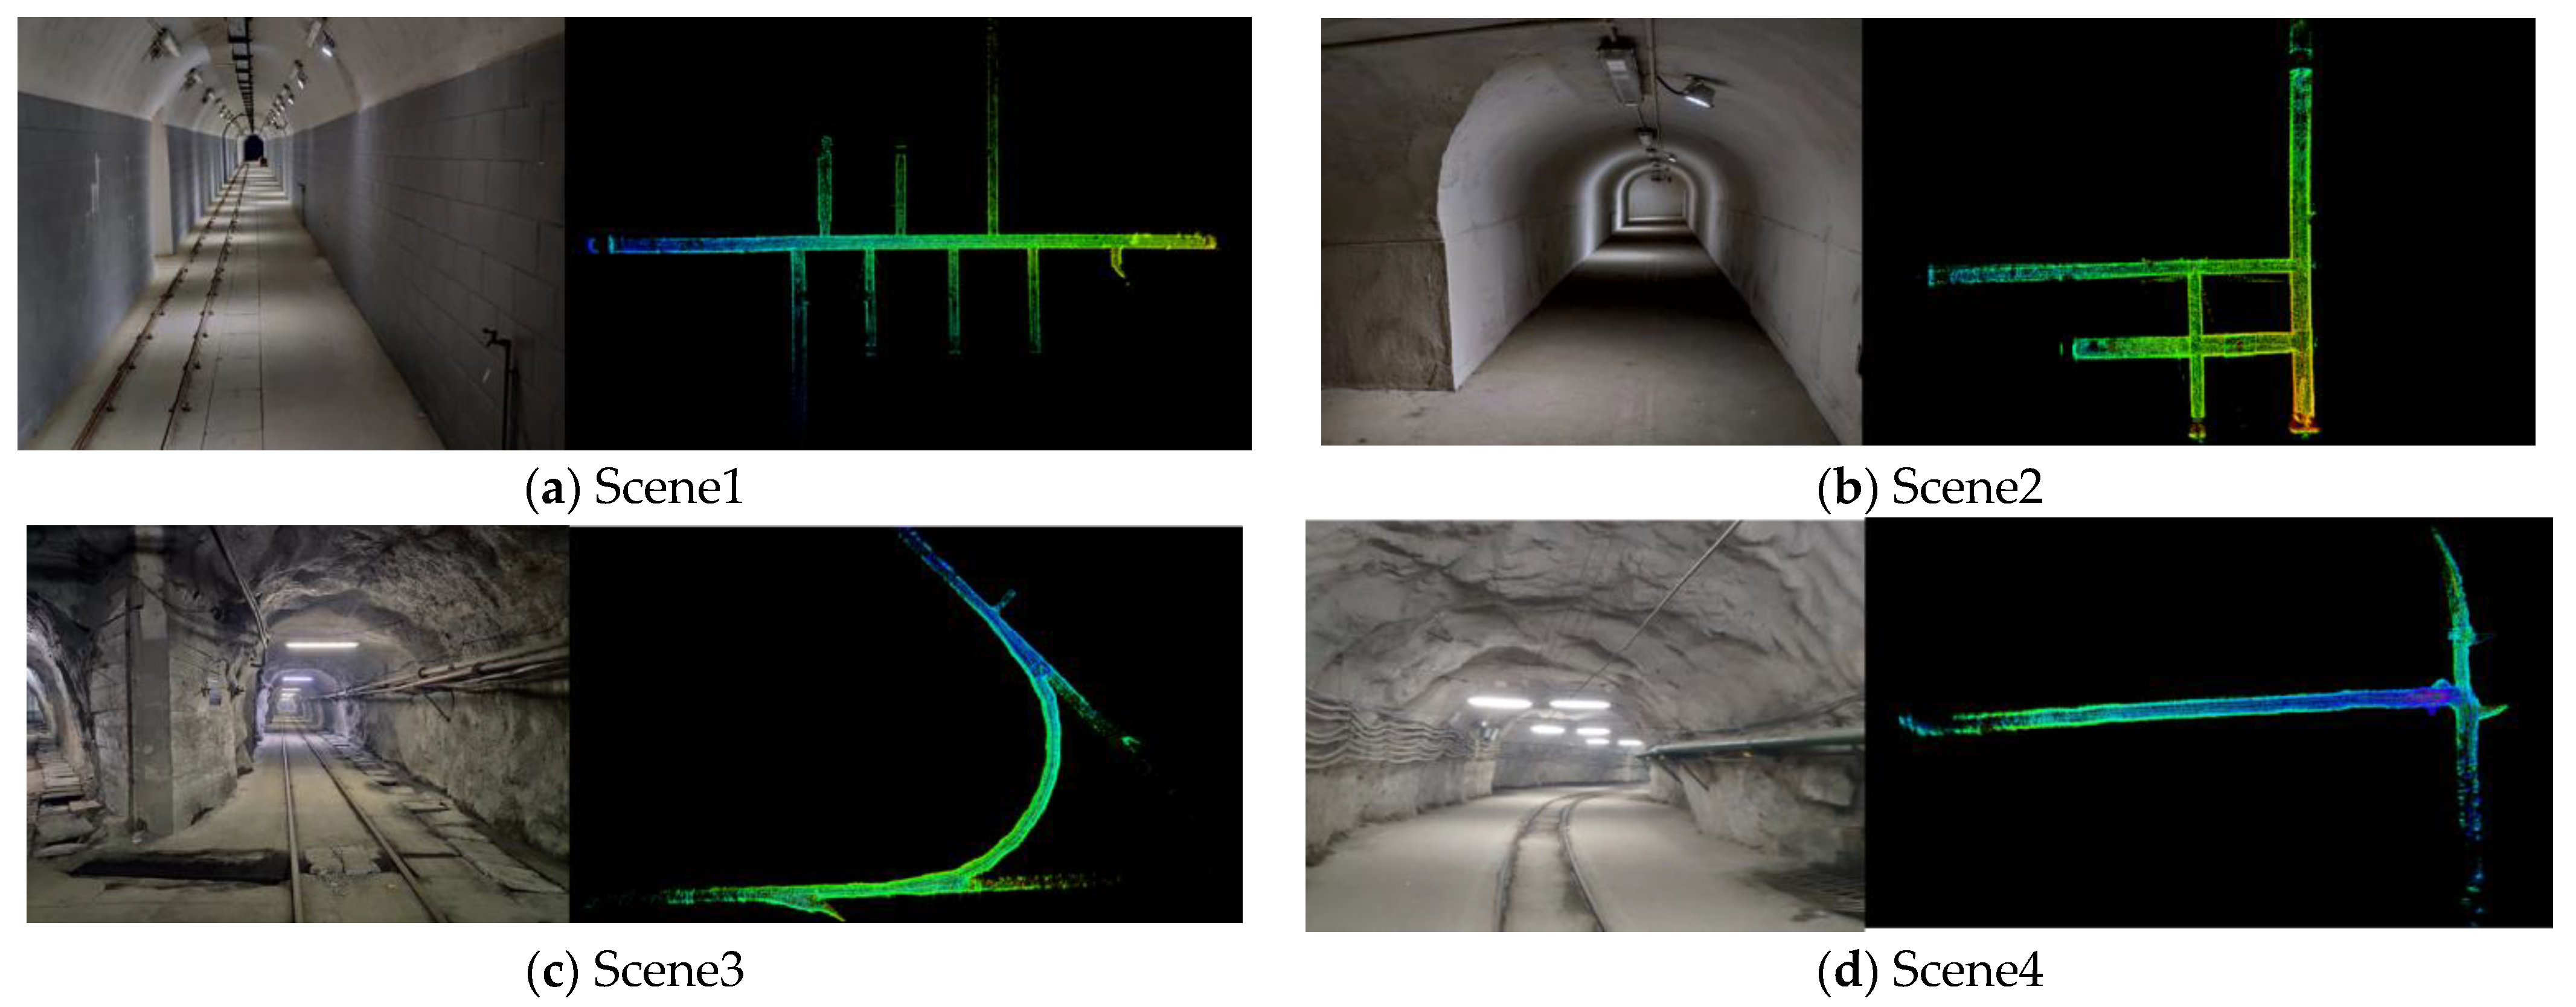 The experimental positioning scenario: (a) Picture of the underground